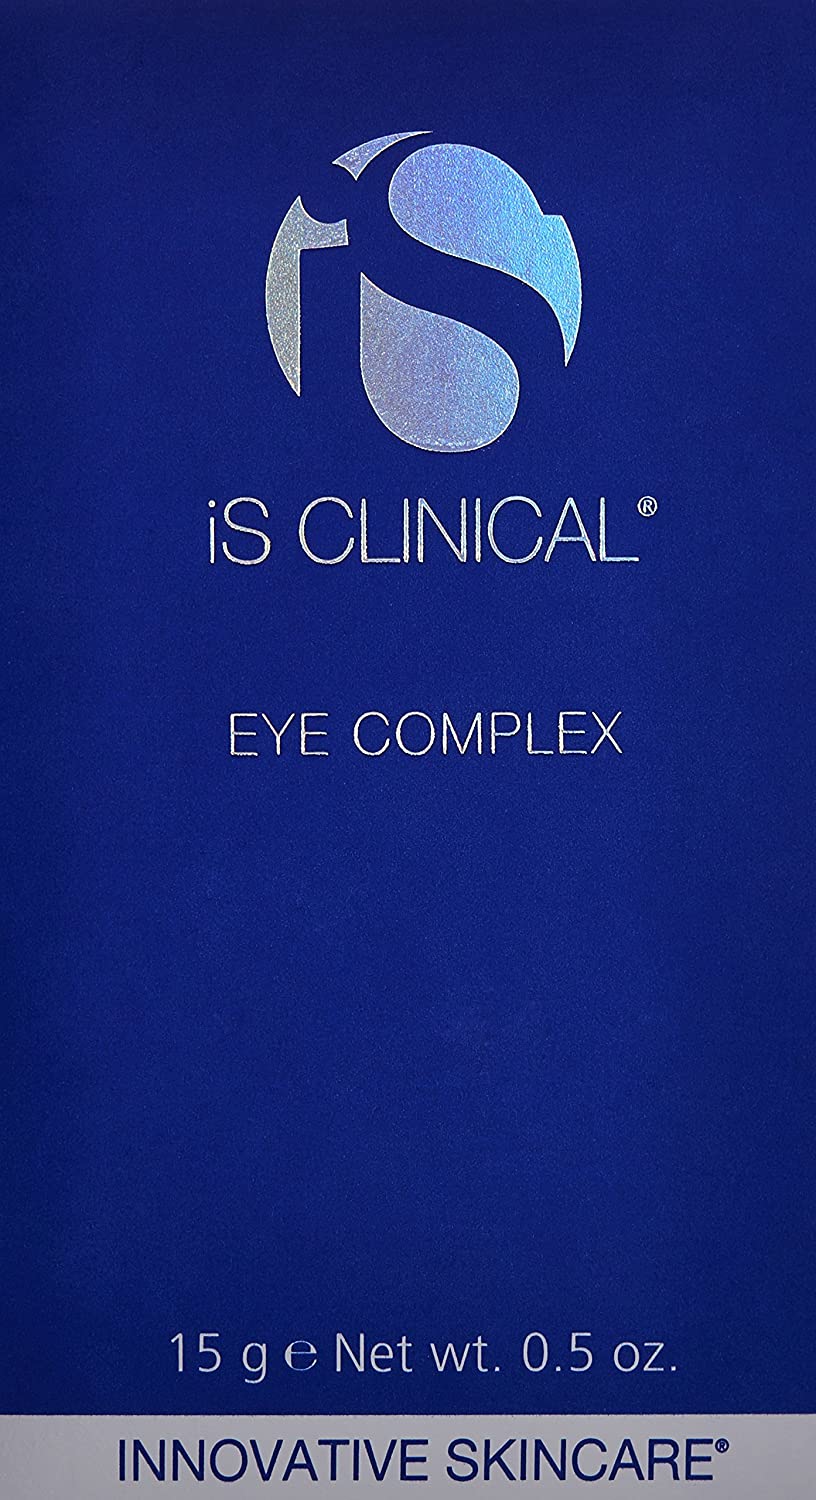 IsClinical Eye Complex - Totality Skincare